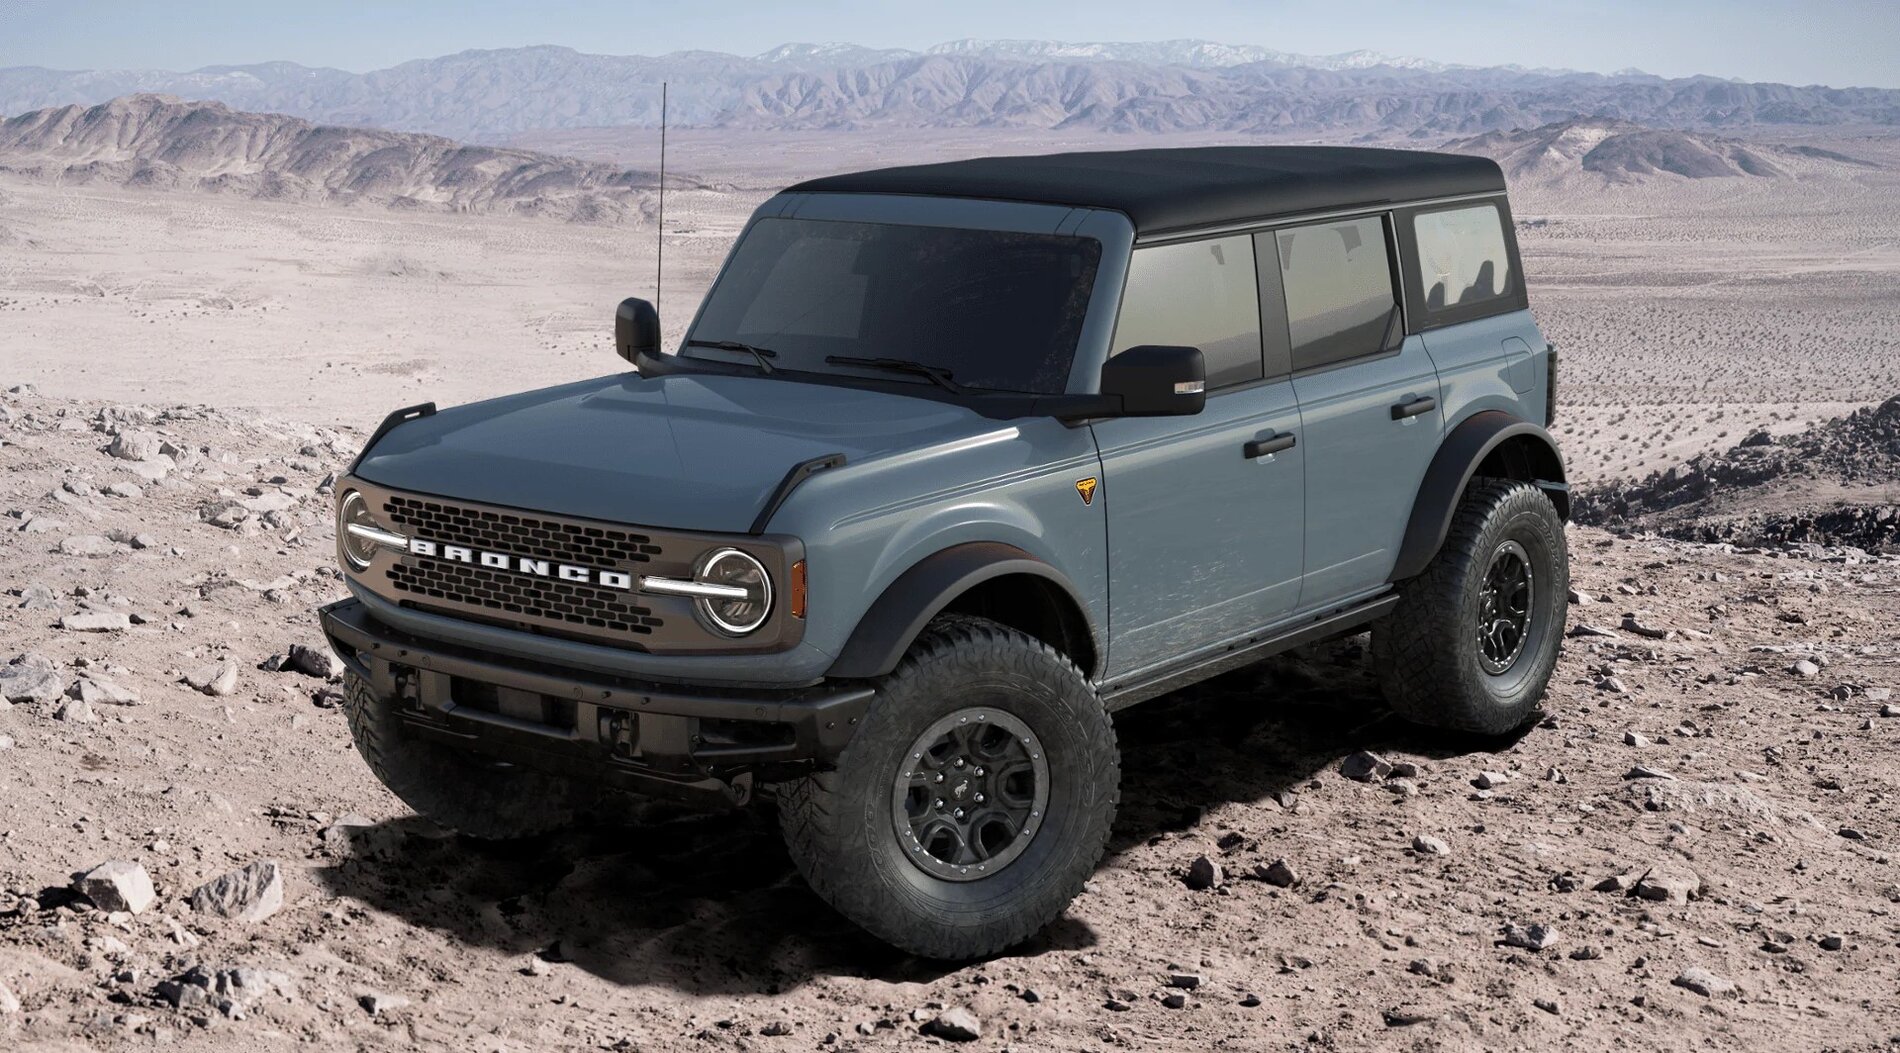 Ford Bronco 📈 Our 2021 Bronco Order Stats / Take Rates After 2K Submissions AA93101A-7C1C-4F0A-A077-D6640B6C2467